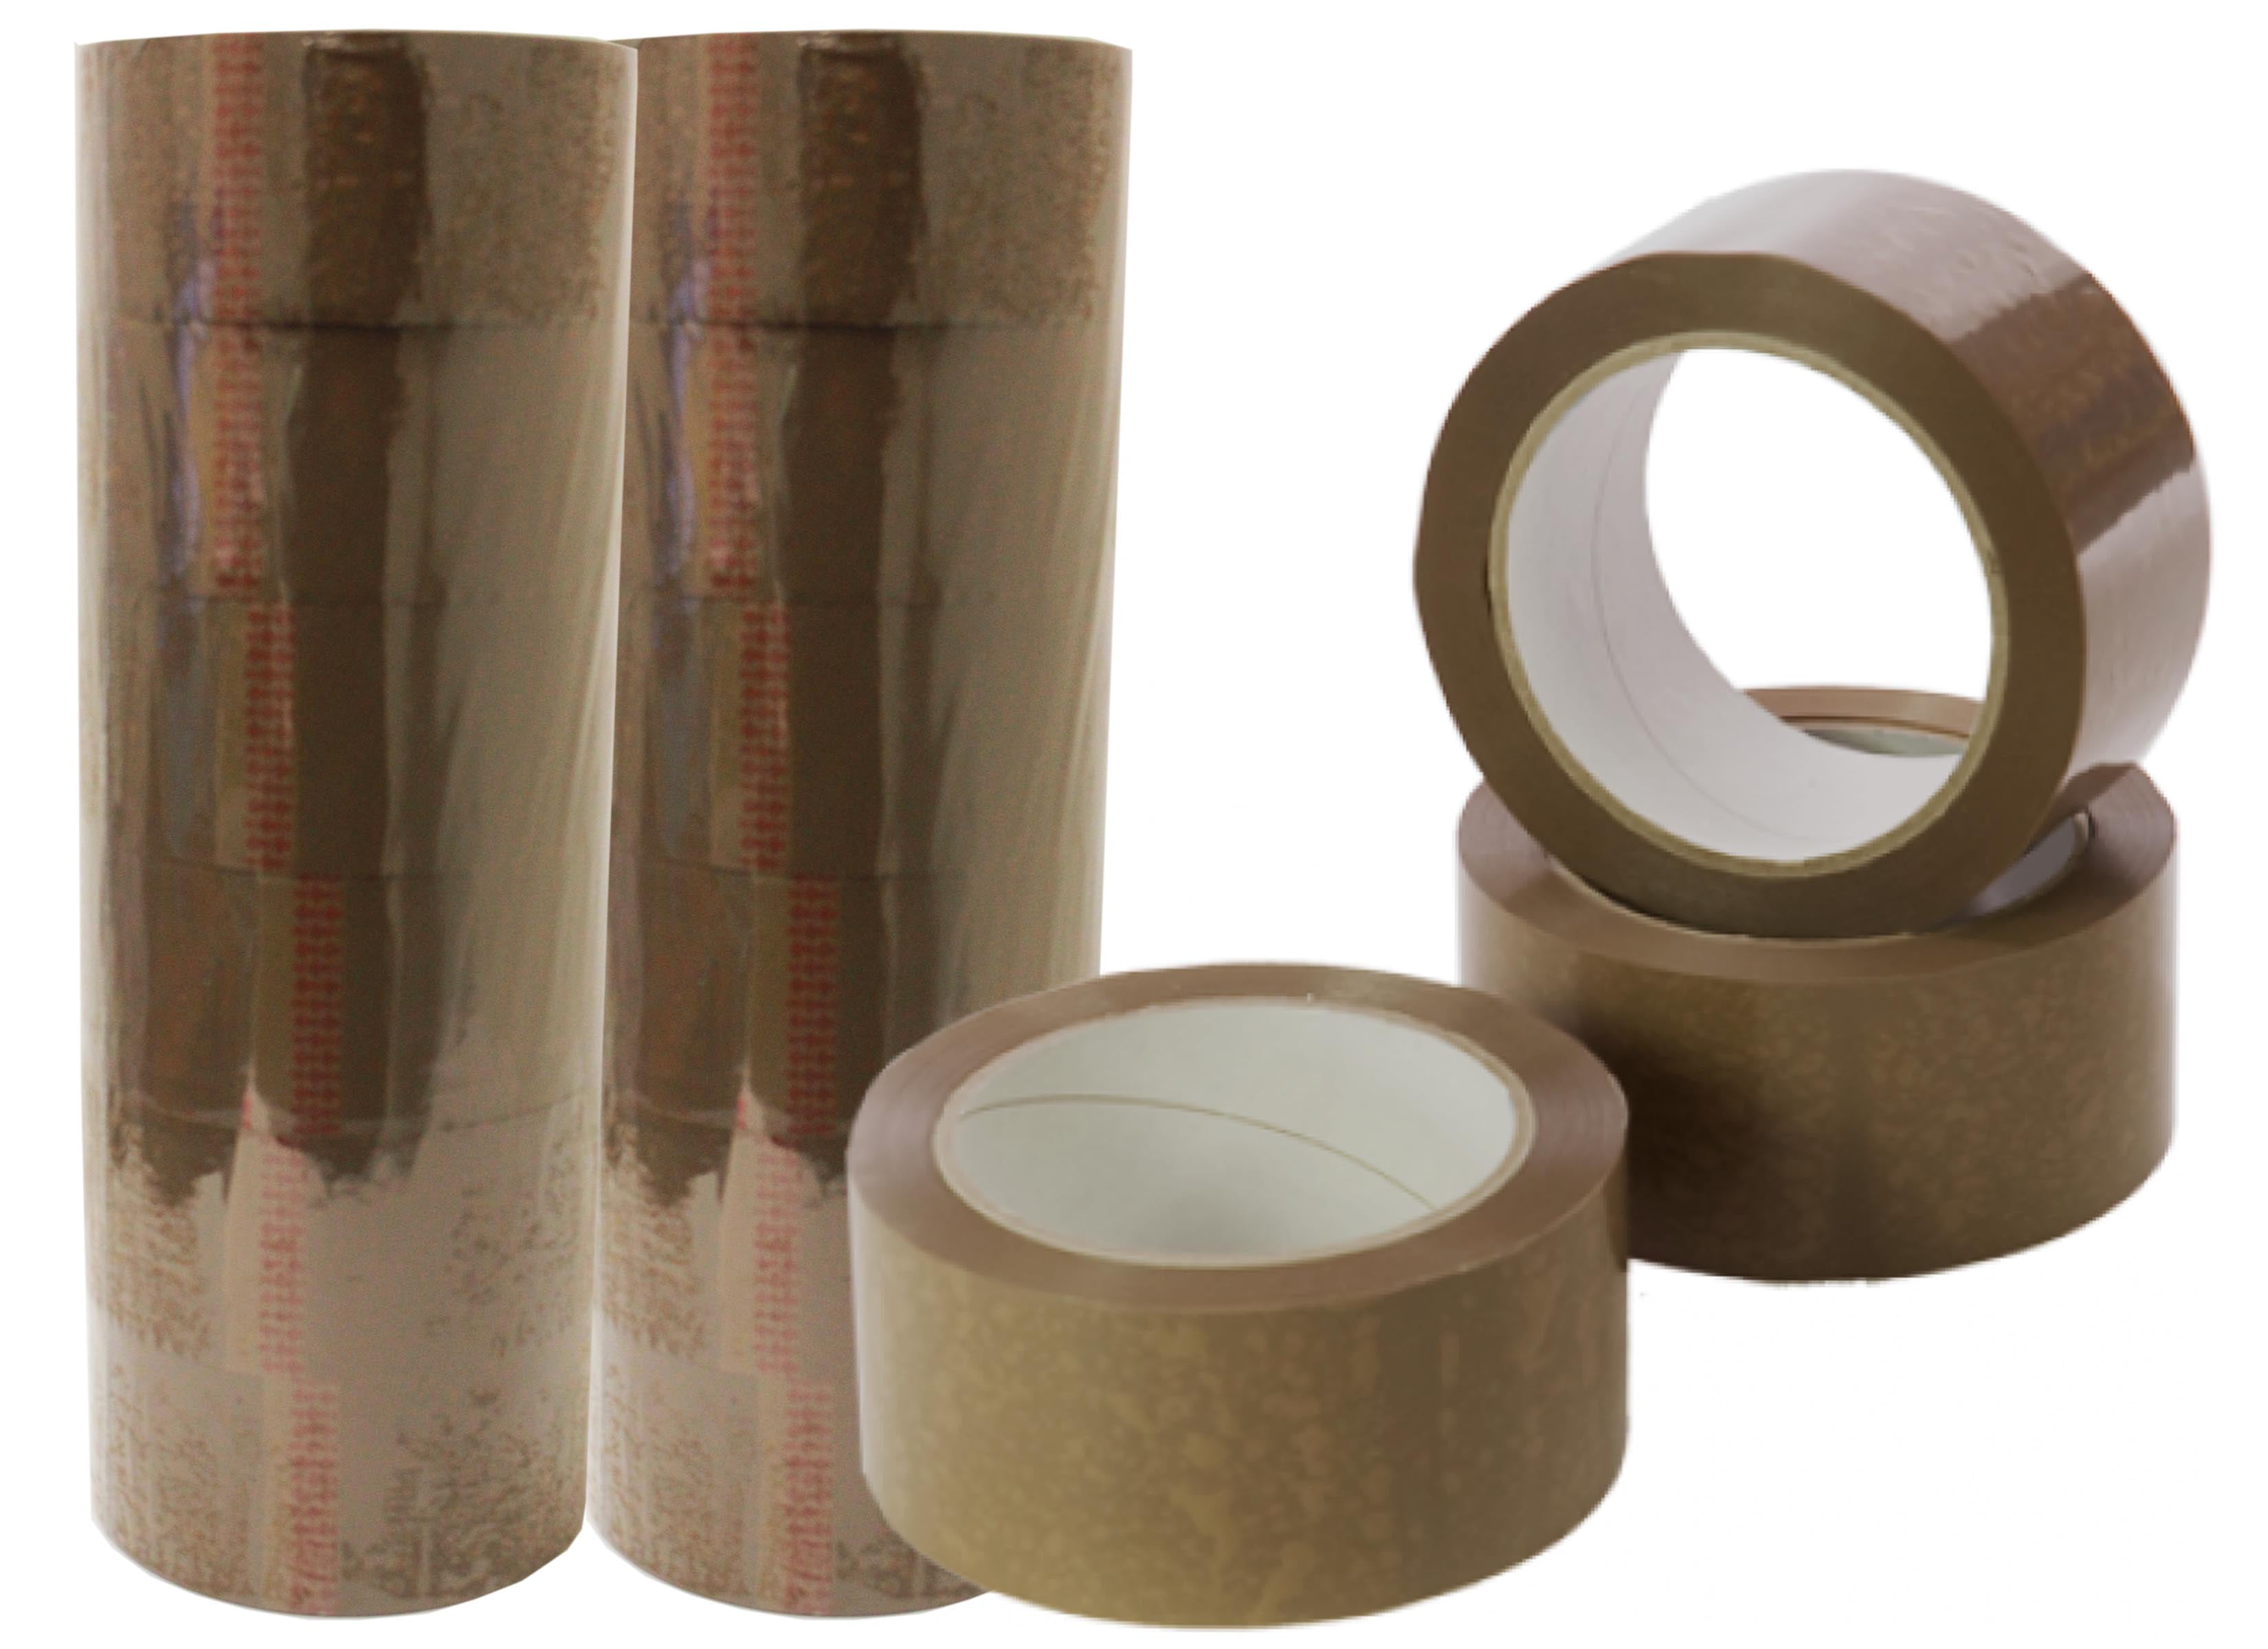 Packing Tape - Floral Print- Rosy Brown-US Stock –